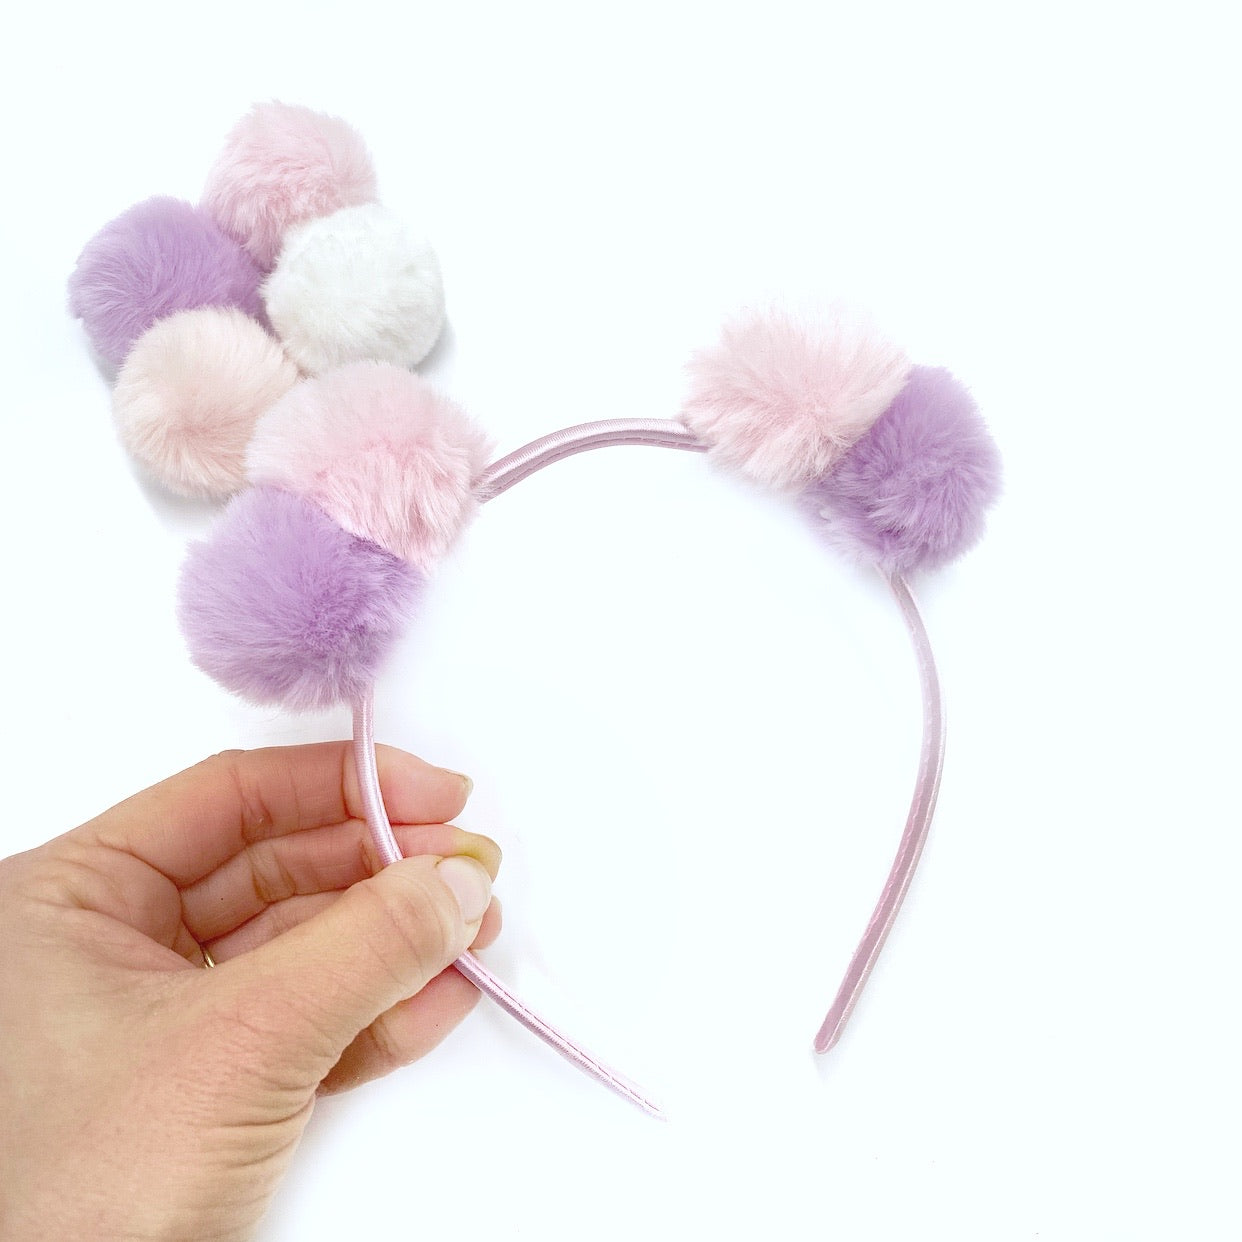 Luxury Fluffy Pom Poms with elastic Hoops -4cm